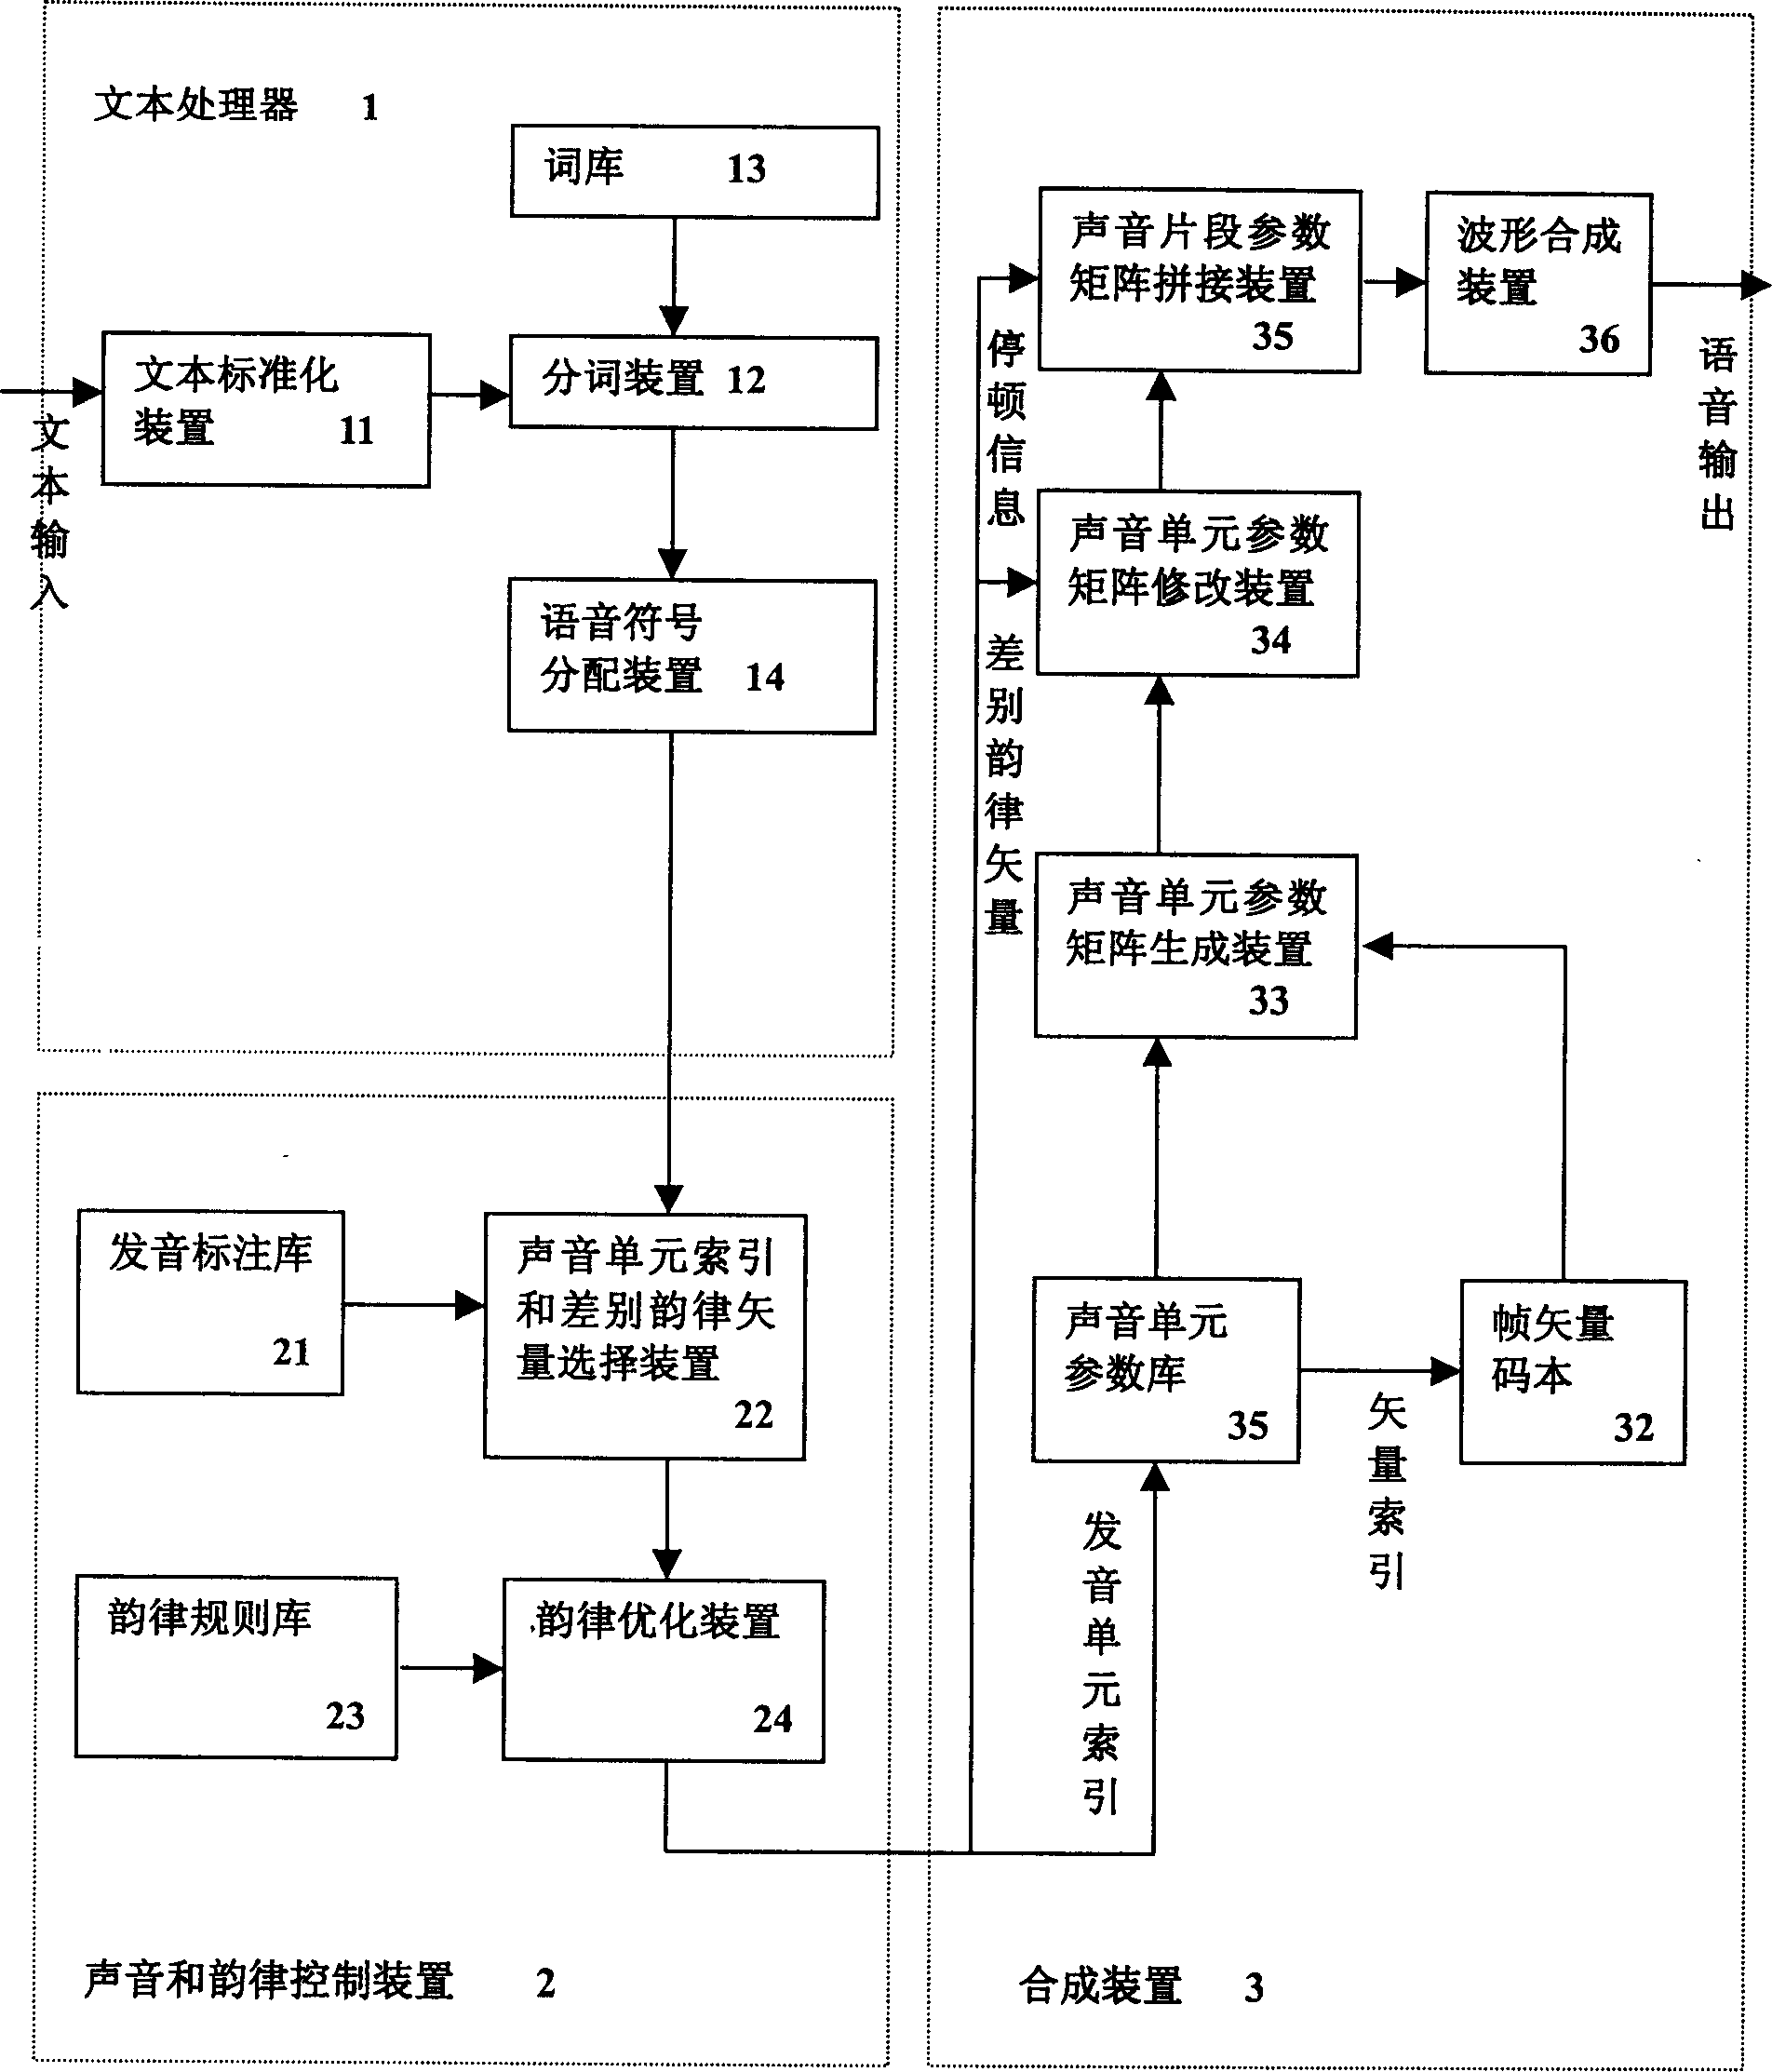 Chinese test to voice joint synthesis system and method using rhythm control